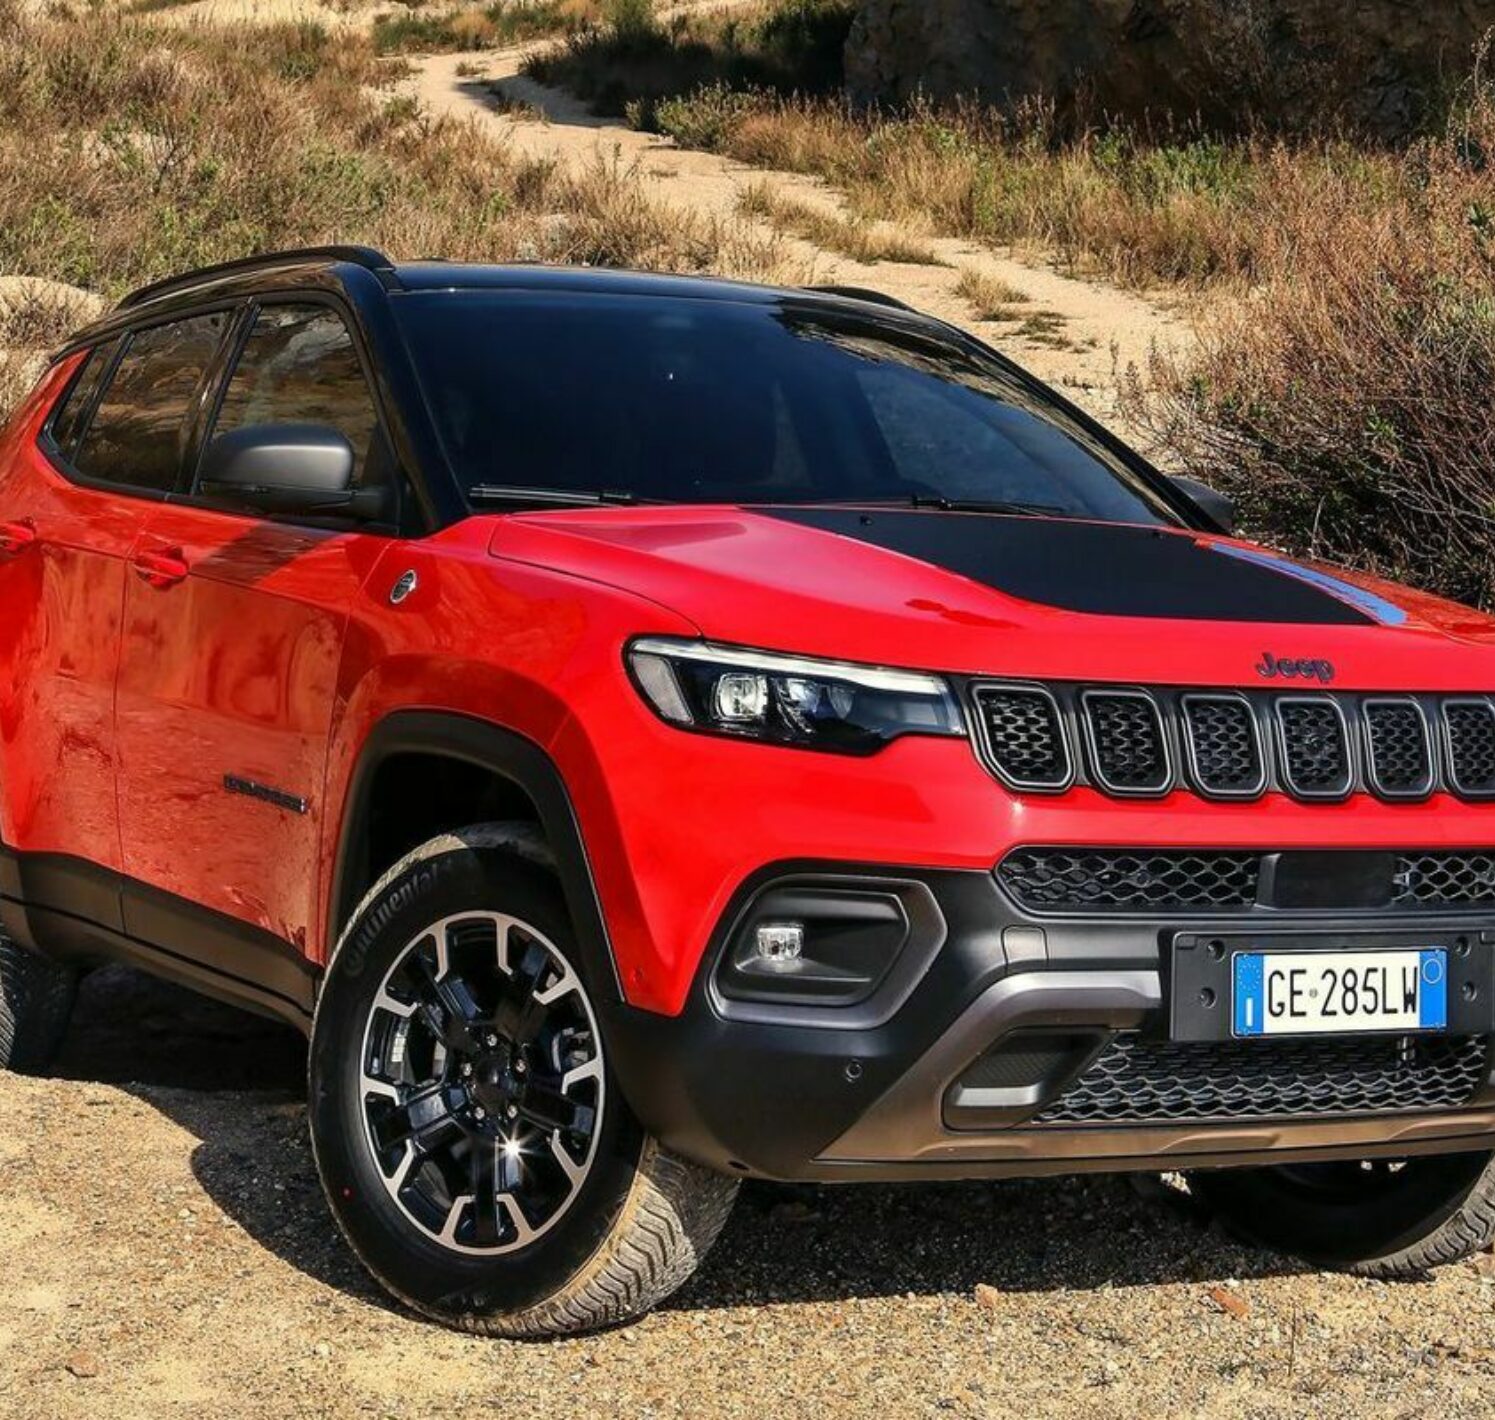 https://autofilter.sk/assets/images/compass/gallery/jeep-compass-2021_14-galeria.jpg - obrazok